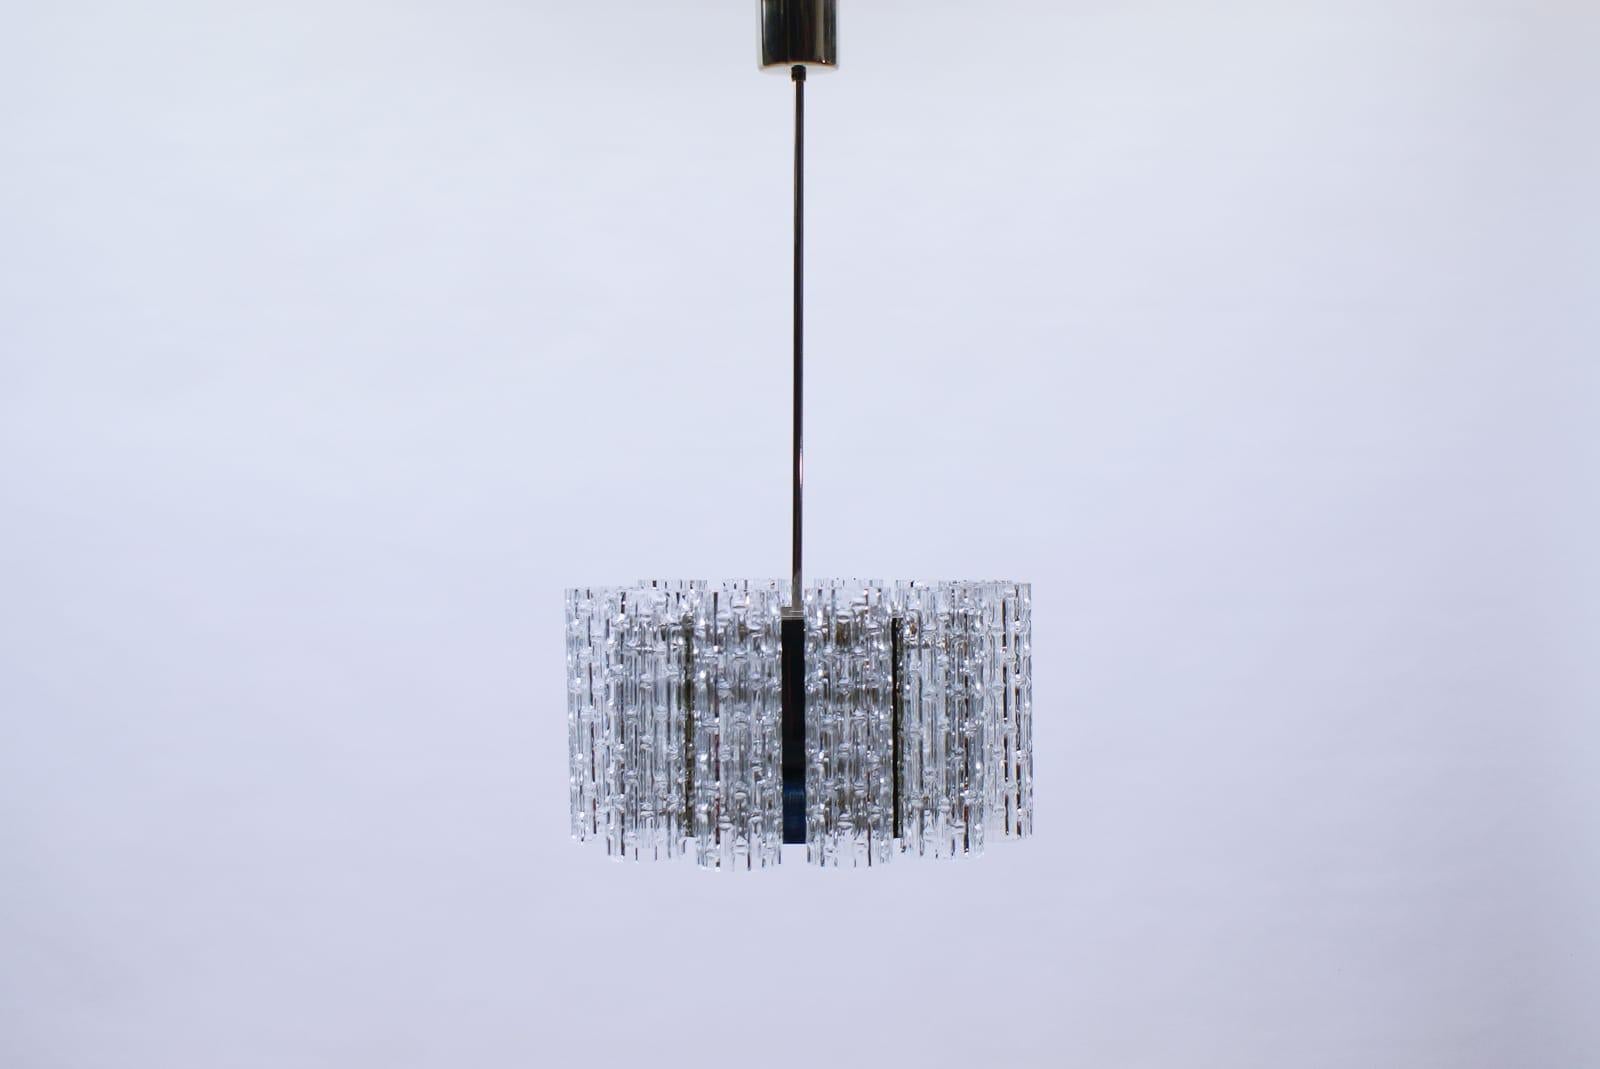 Metal Ceiling Lamp with 12 Textured Glass Shades, Kaiser Leuchten Germany, 1960s For Sale